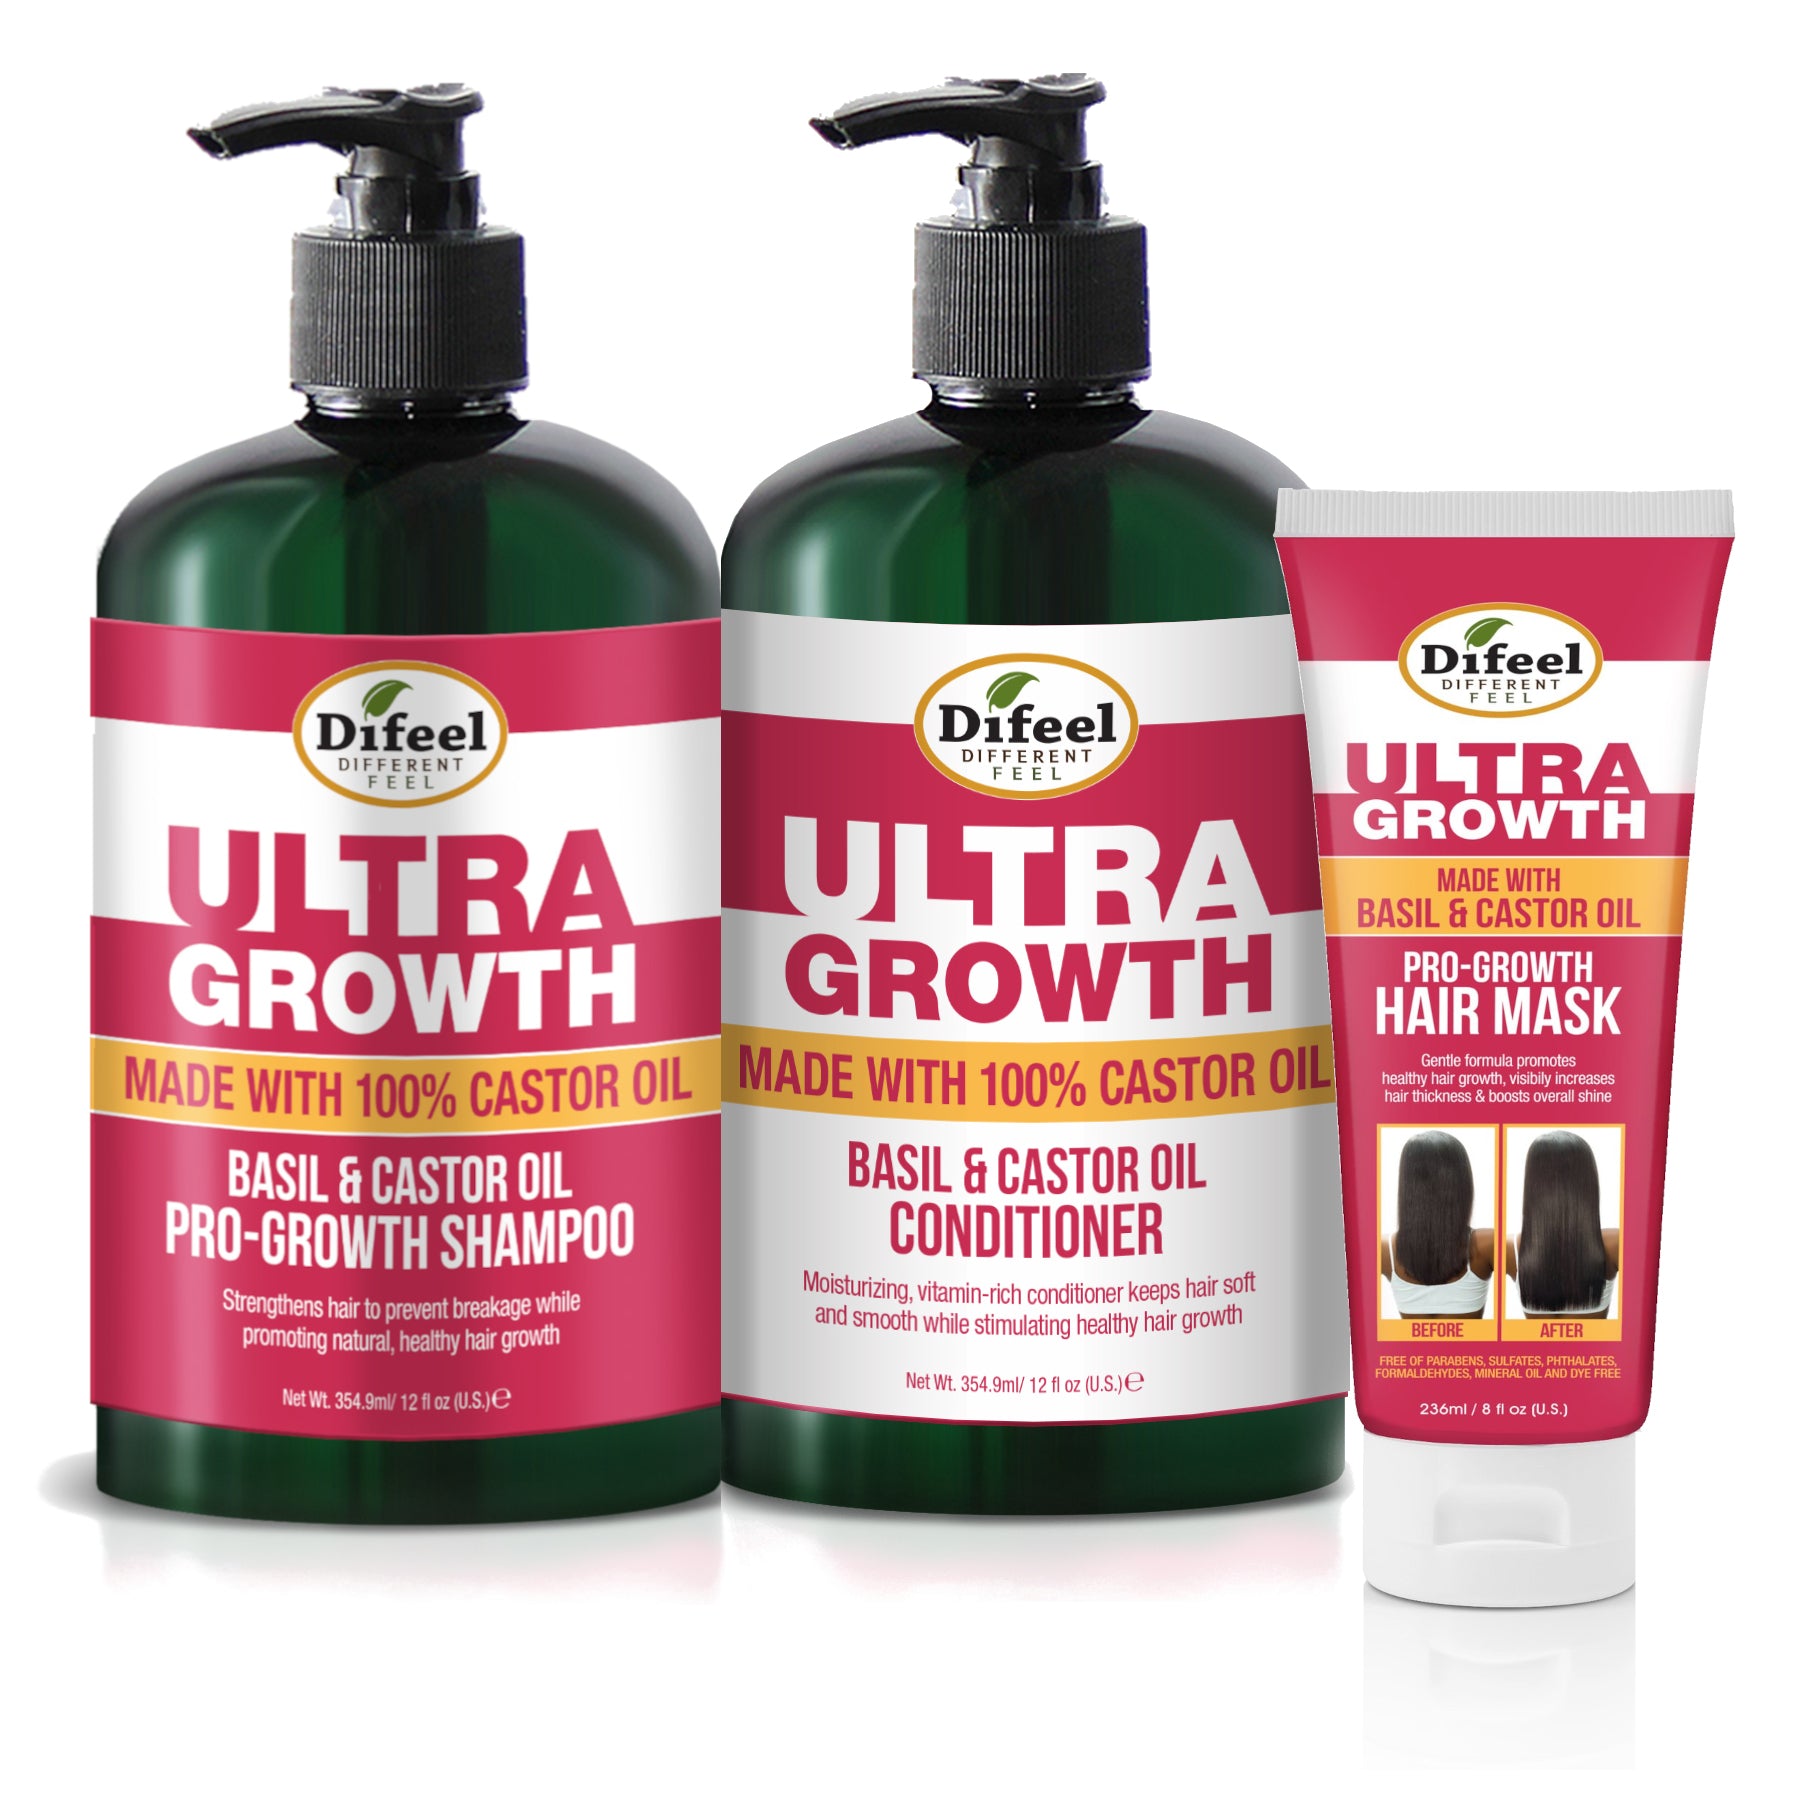 Difeel Ultra Growth Intense Growth Collection - 3-PC Shampoo, Conditioner & Hair Mask Set